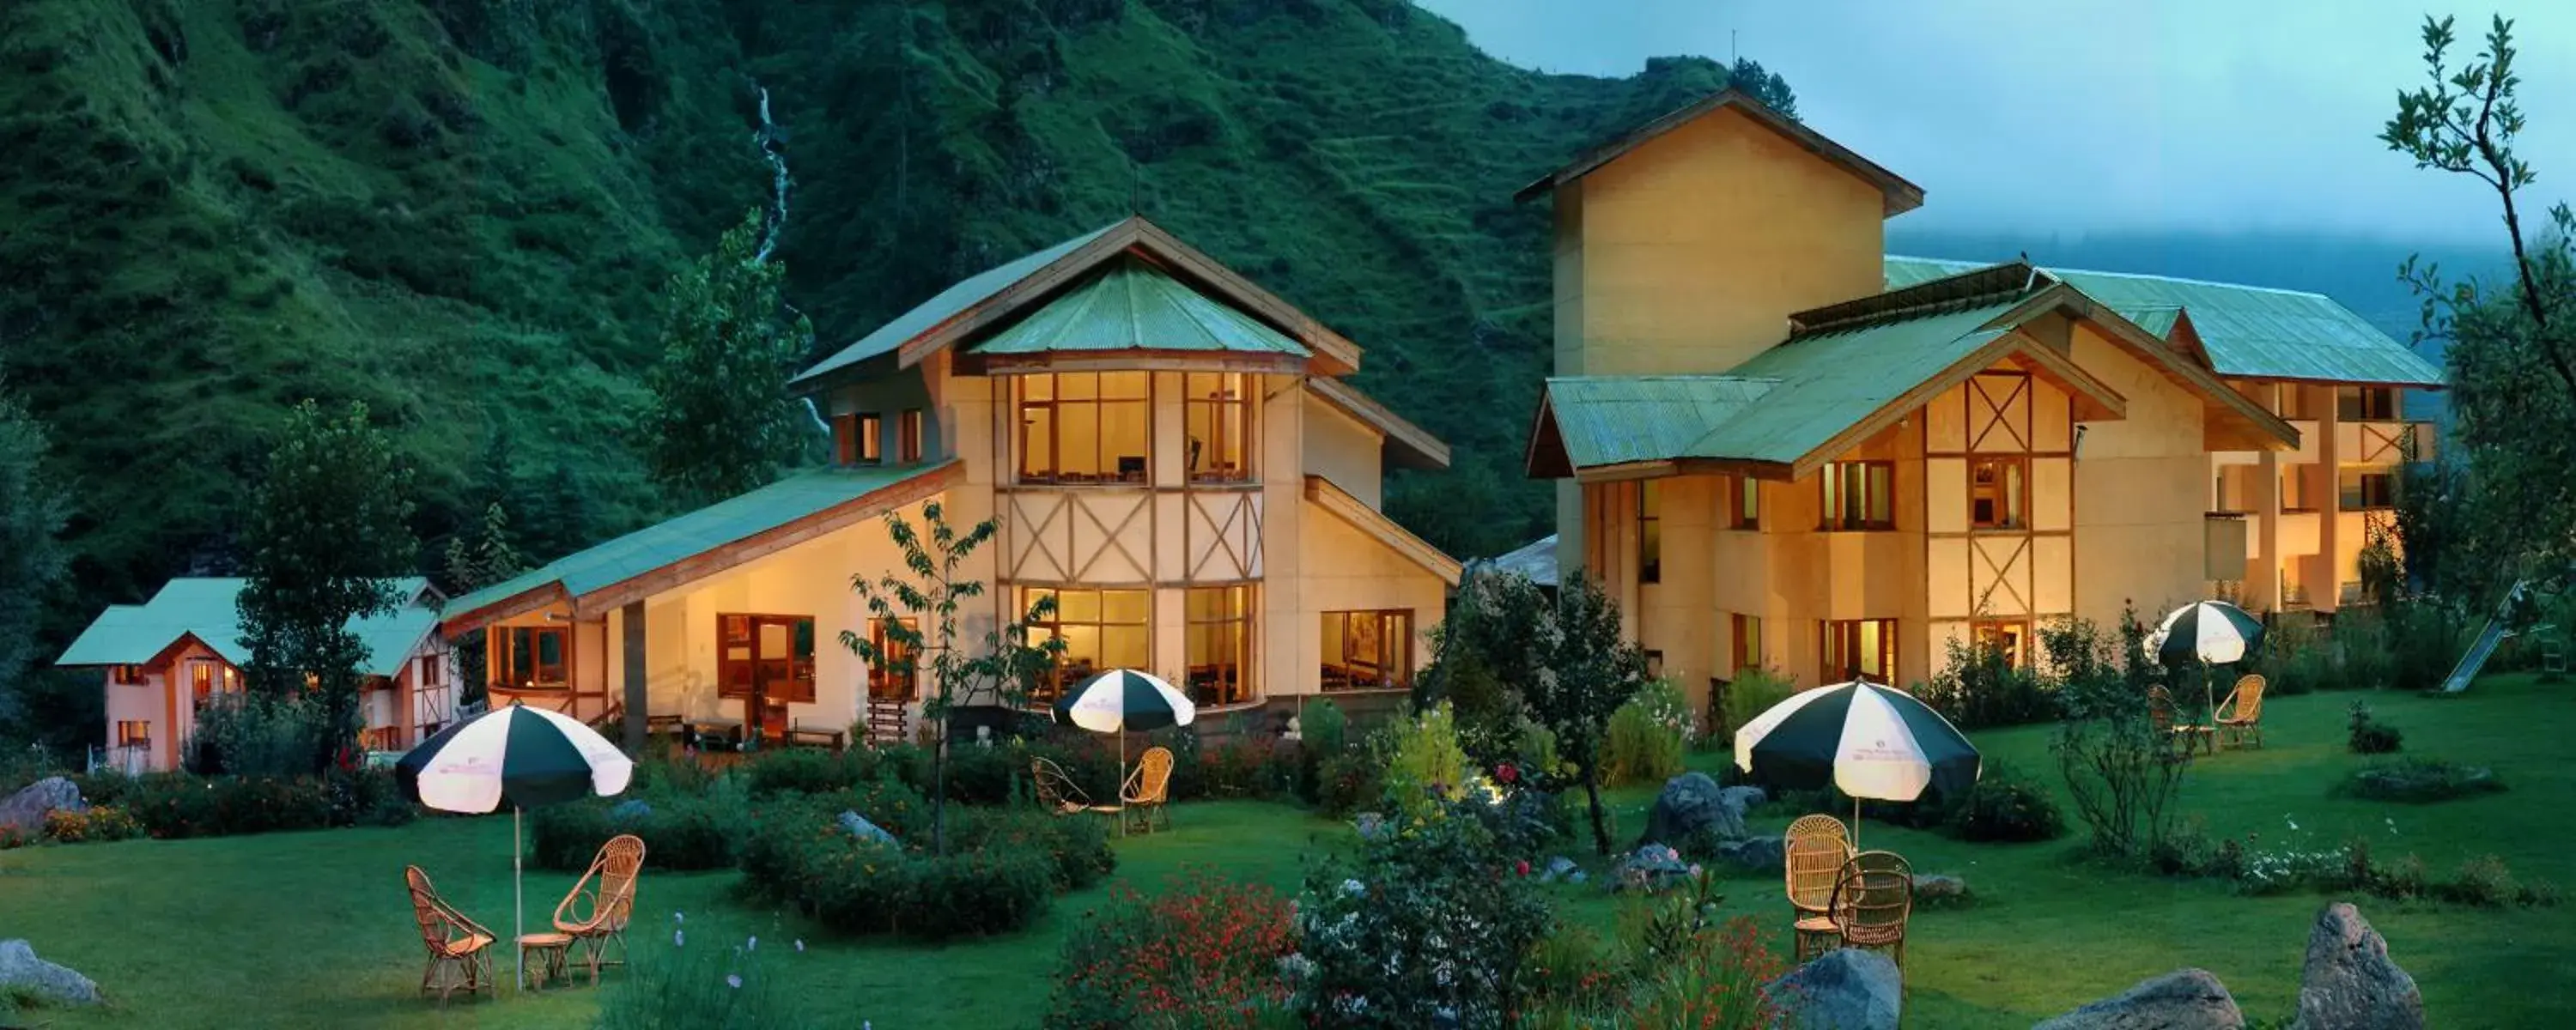 Sunset, Property Building in Solang Valley Resort